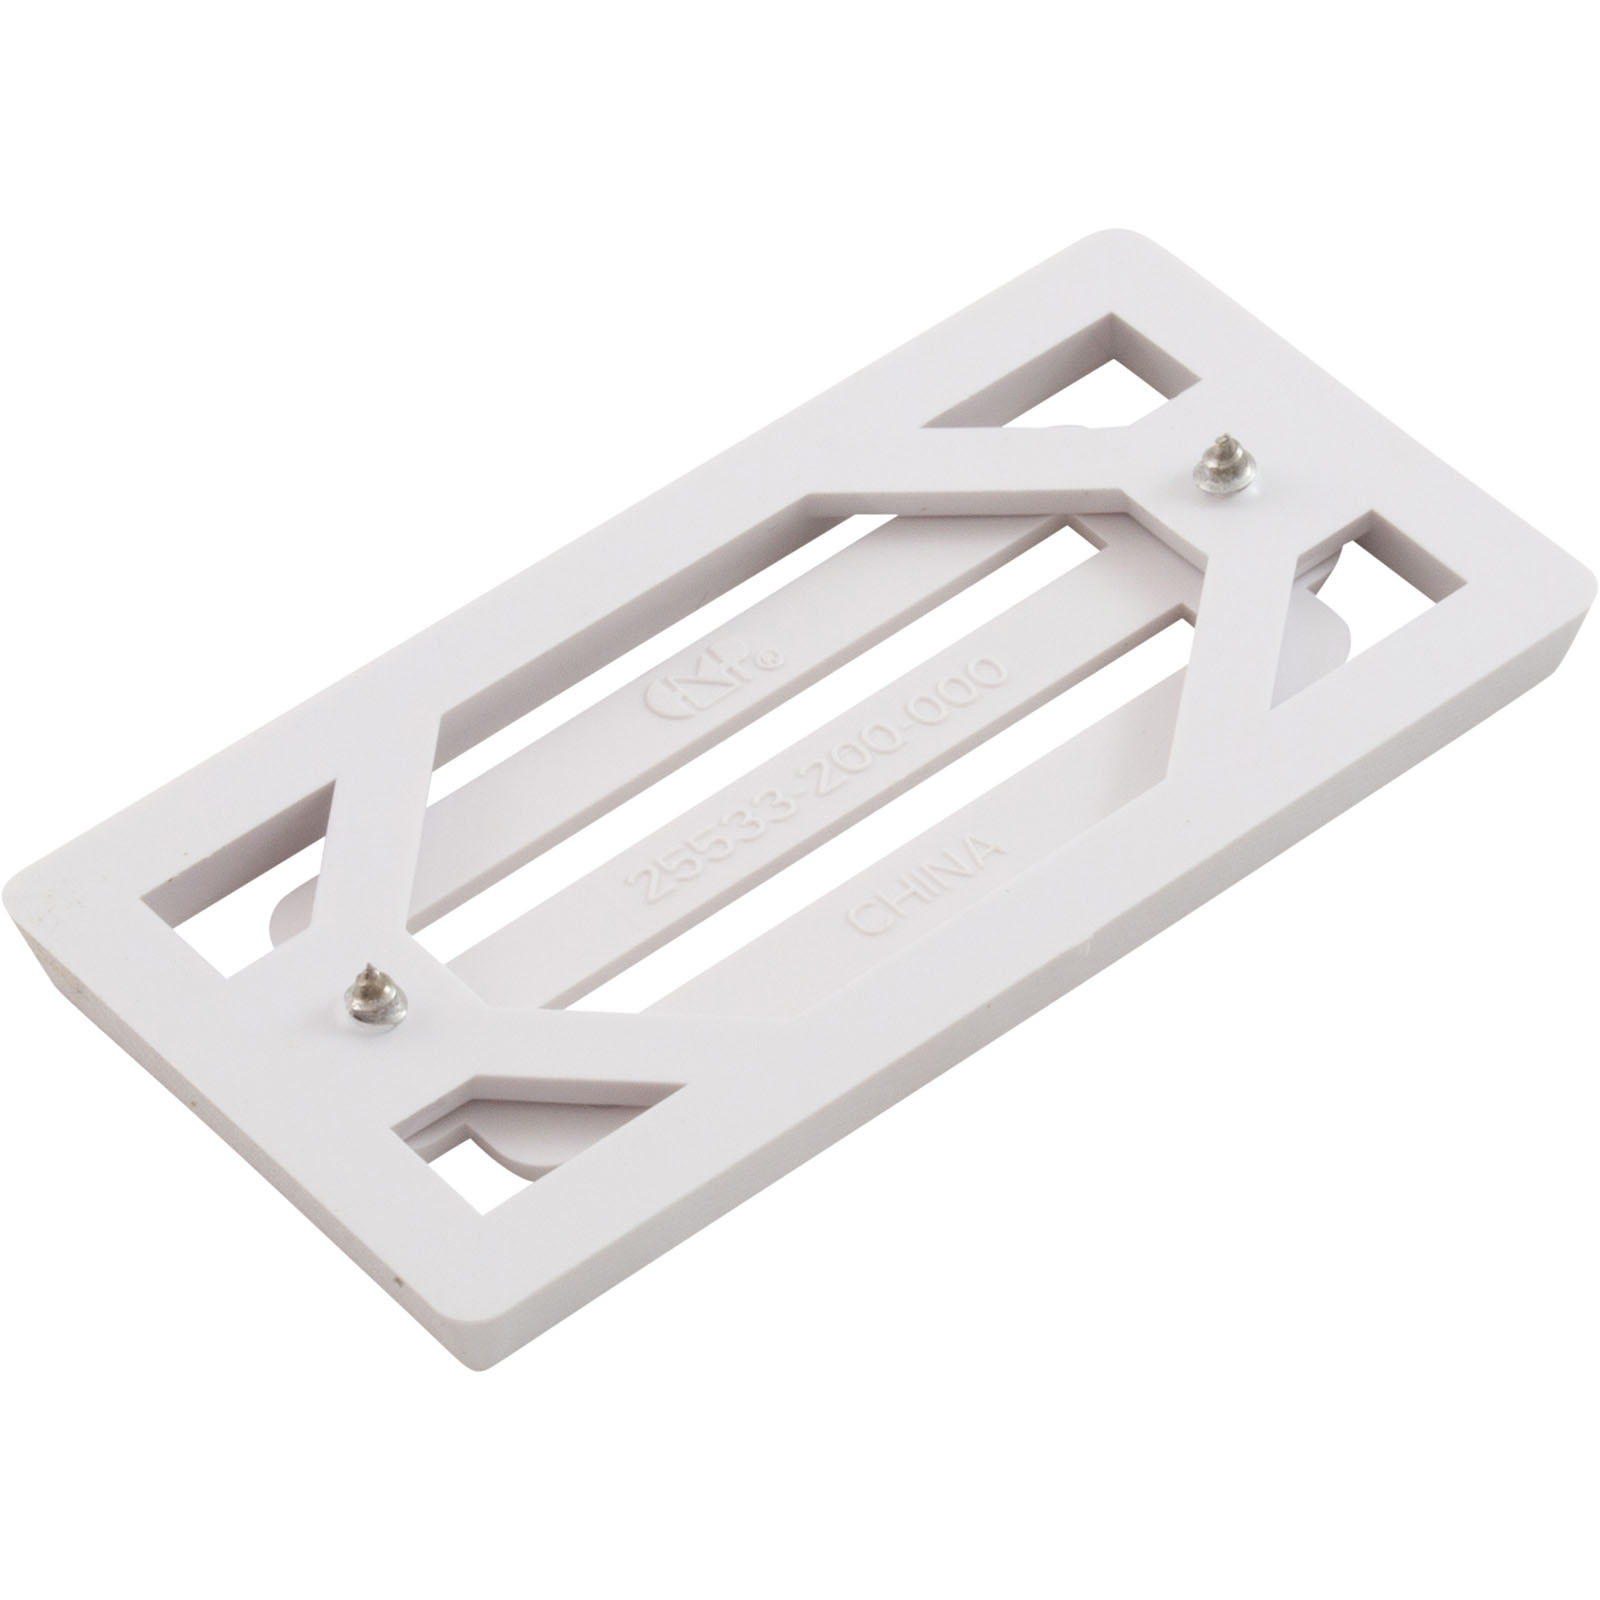 Picture of 25533-200-000 3 Bar Grate And Frame Assembly White